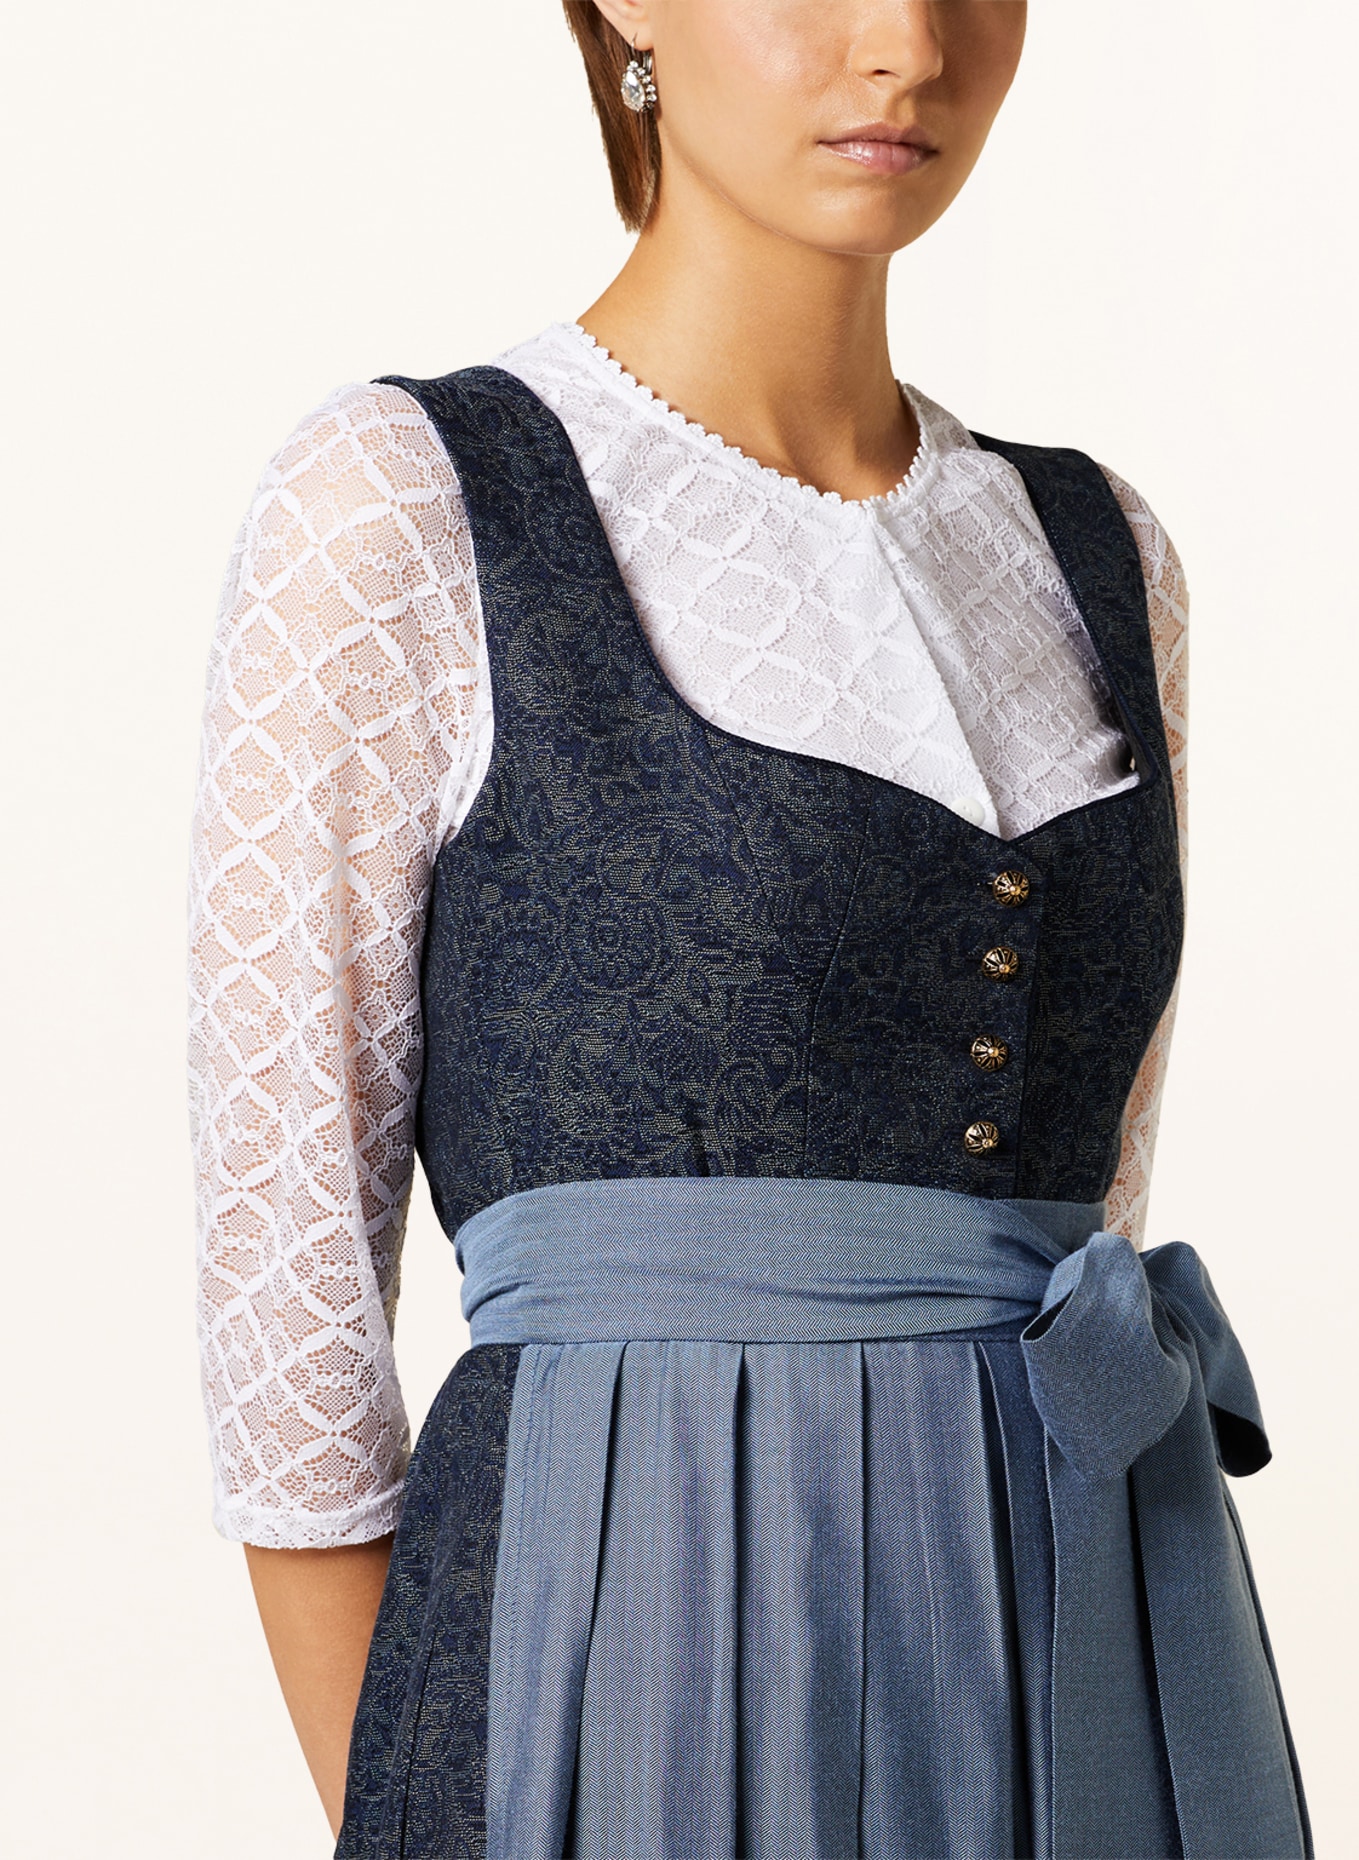 WALDORFF Dirndl blouse in lace with 3/4 sleeves, Color: WHITE (Image 3)